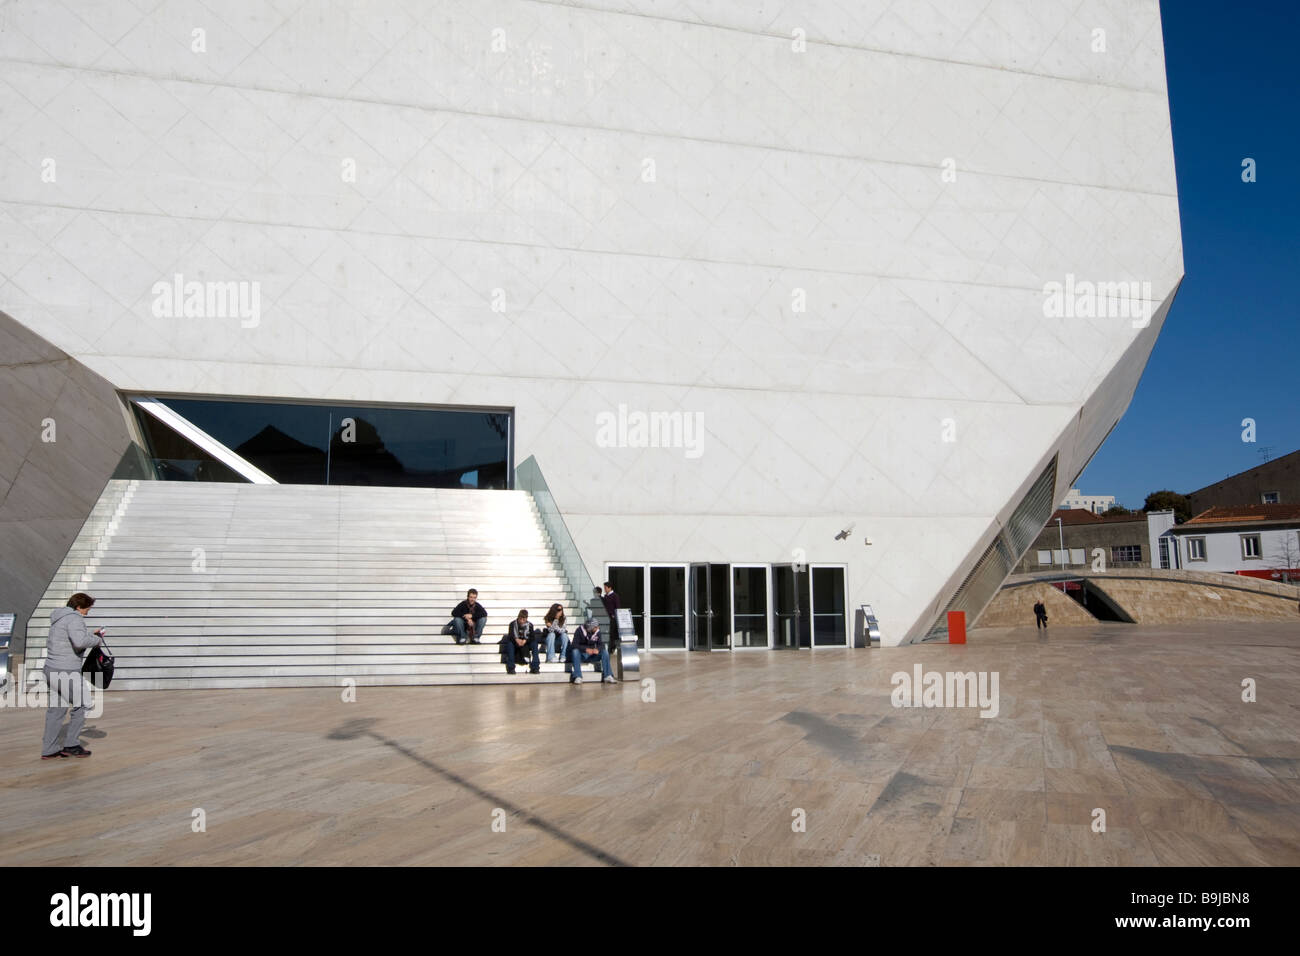 Casa Da Musica, House of Music, opera house finished in 2005, designed by dutch architect Rem Koolhaas, Porto, UNESCO World Cul Stock Photo